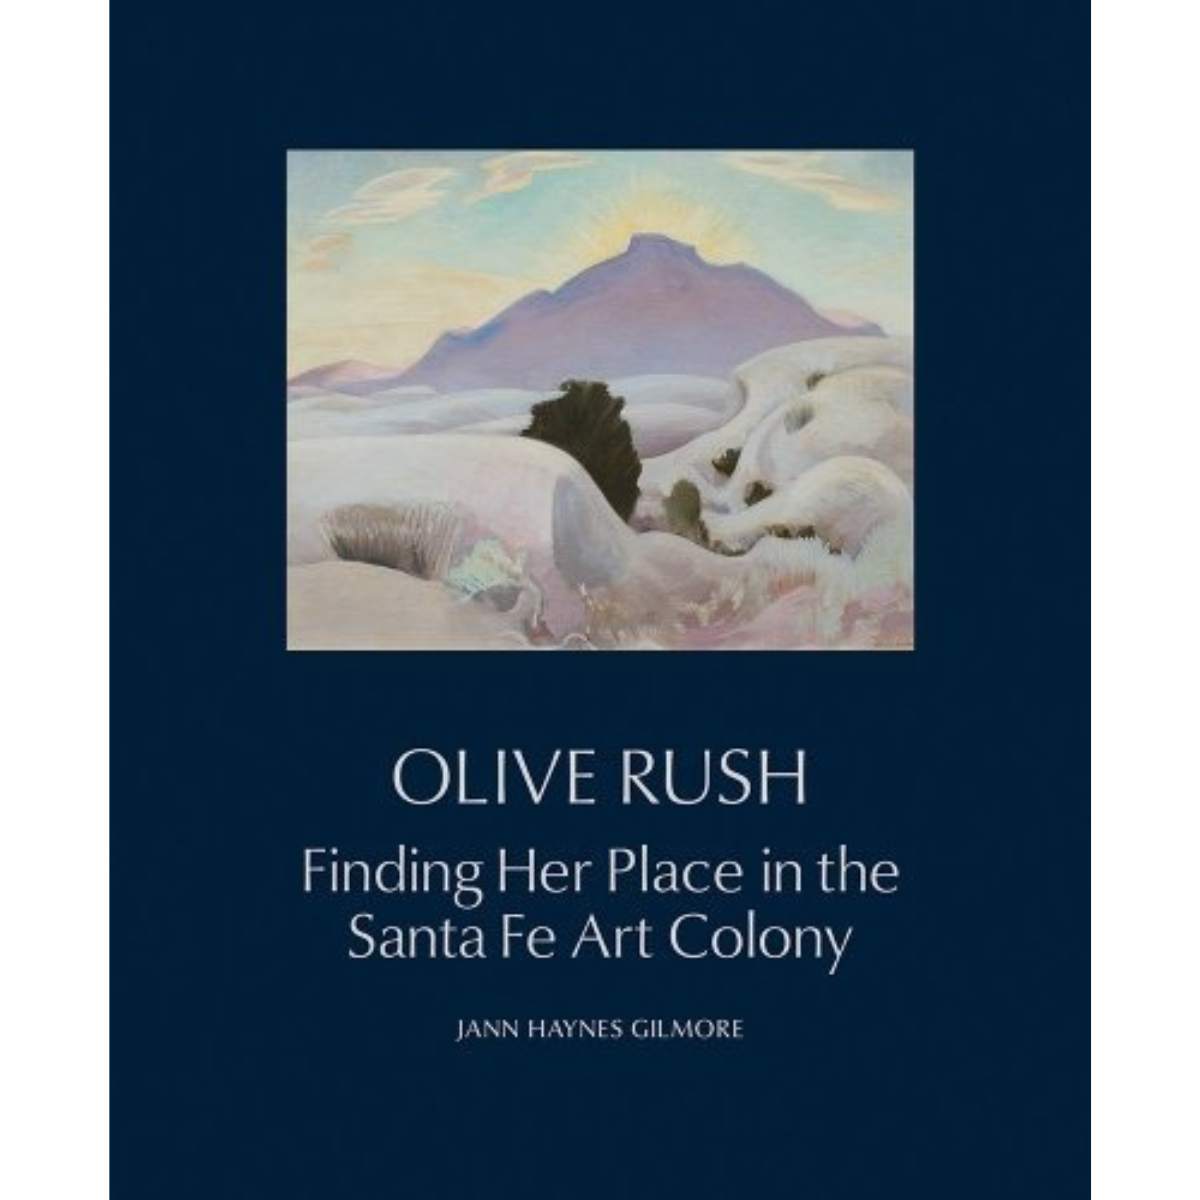 Olive Rush - Finding Her Place in the Santa Fe Art Colony